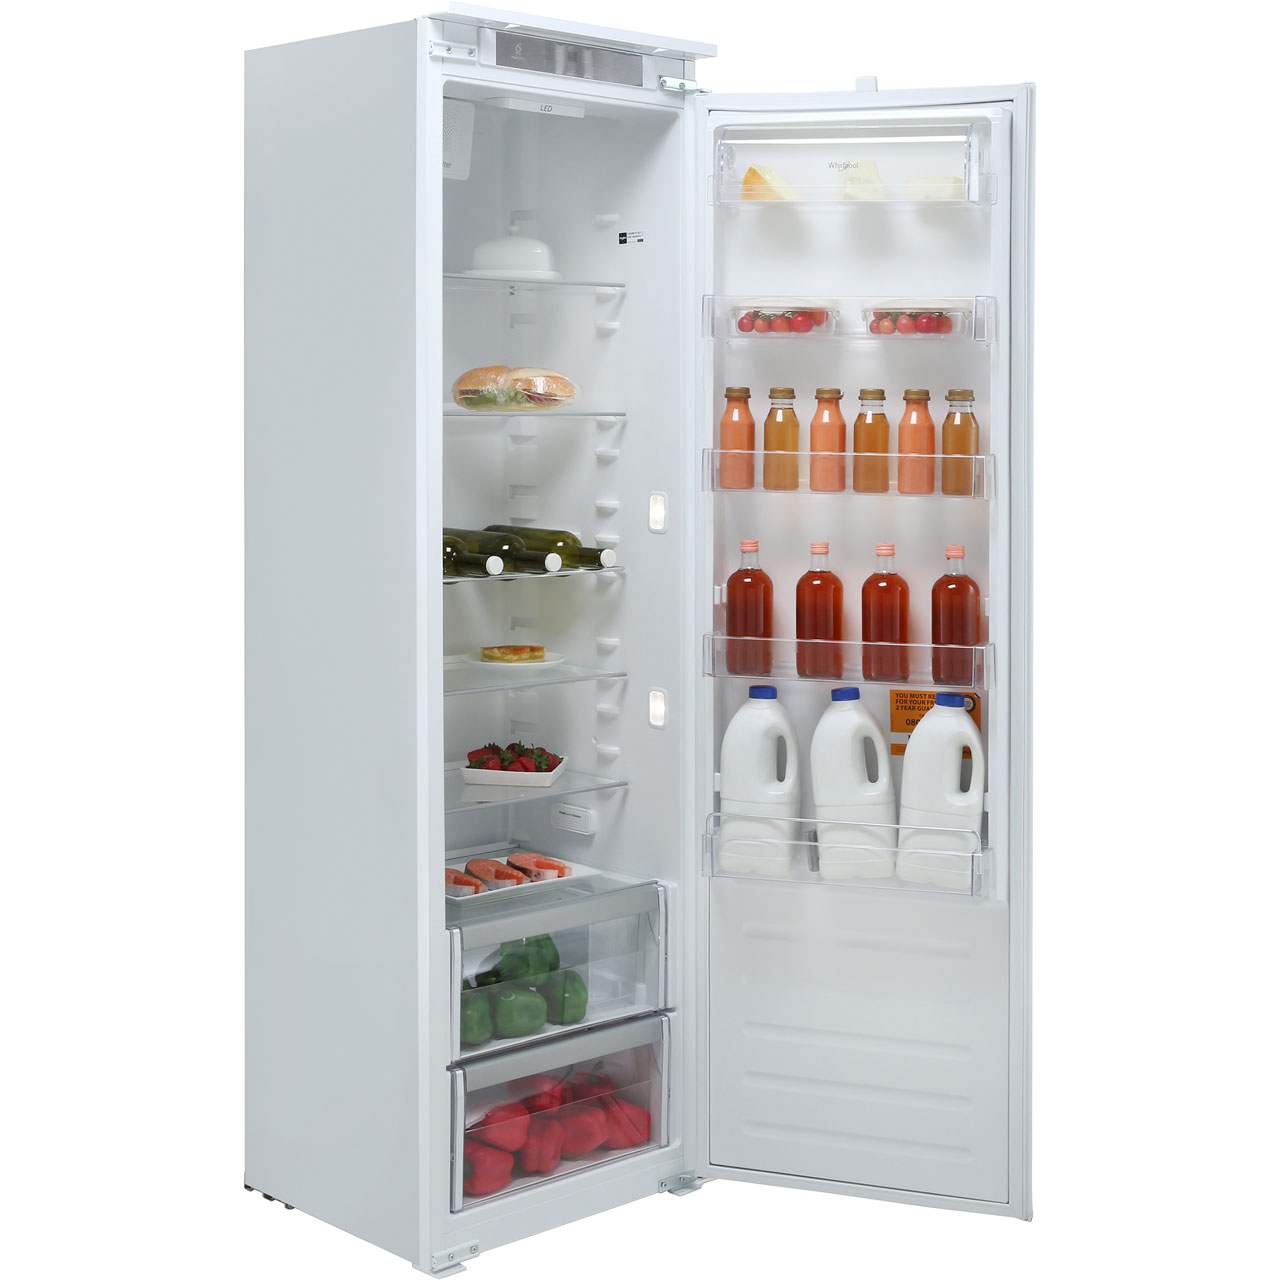 Whirlpool ARG18083A++.1 Integrated Upright Fridge Review